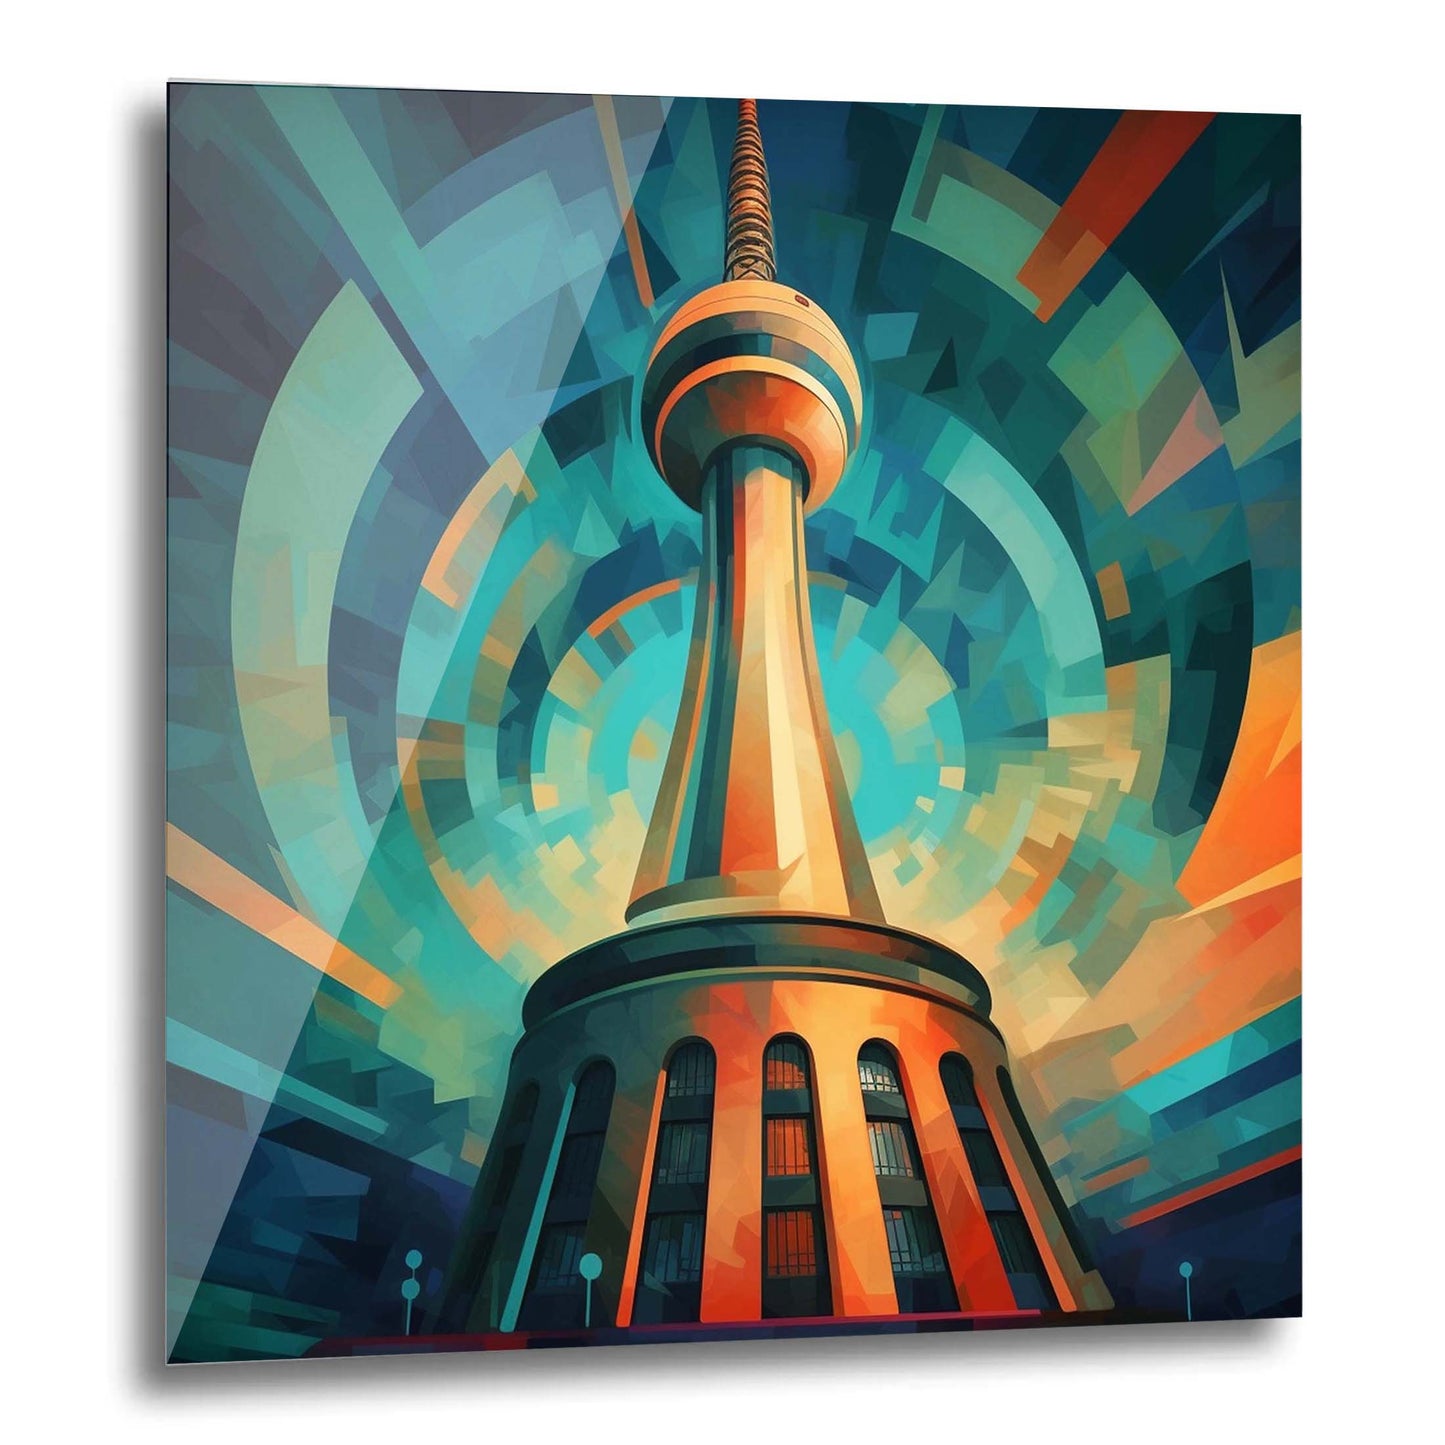 Berlin TV tower - mural in the style of futurism